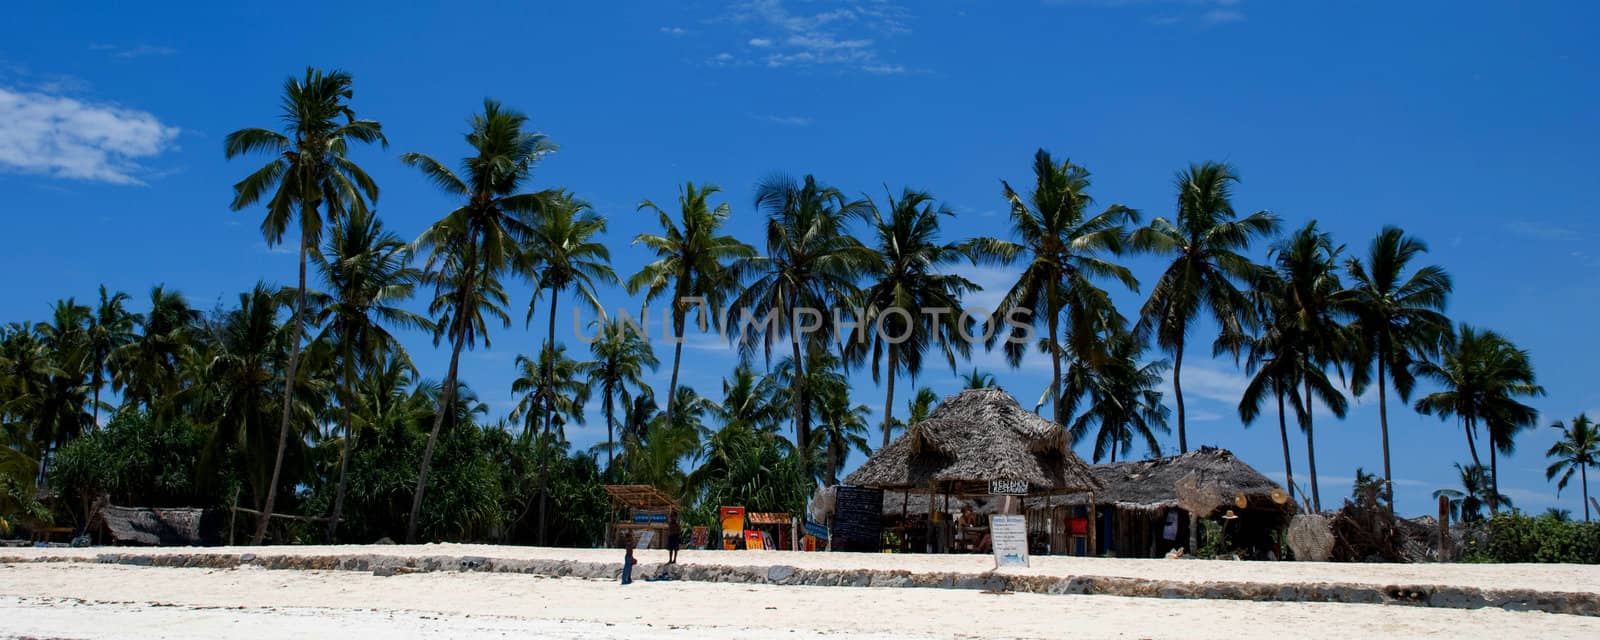 Huts under palm trees on a beach with blue sky